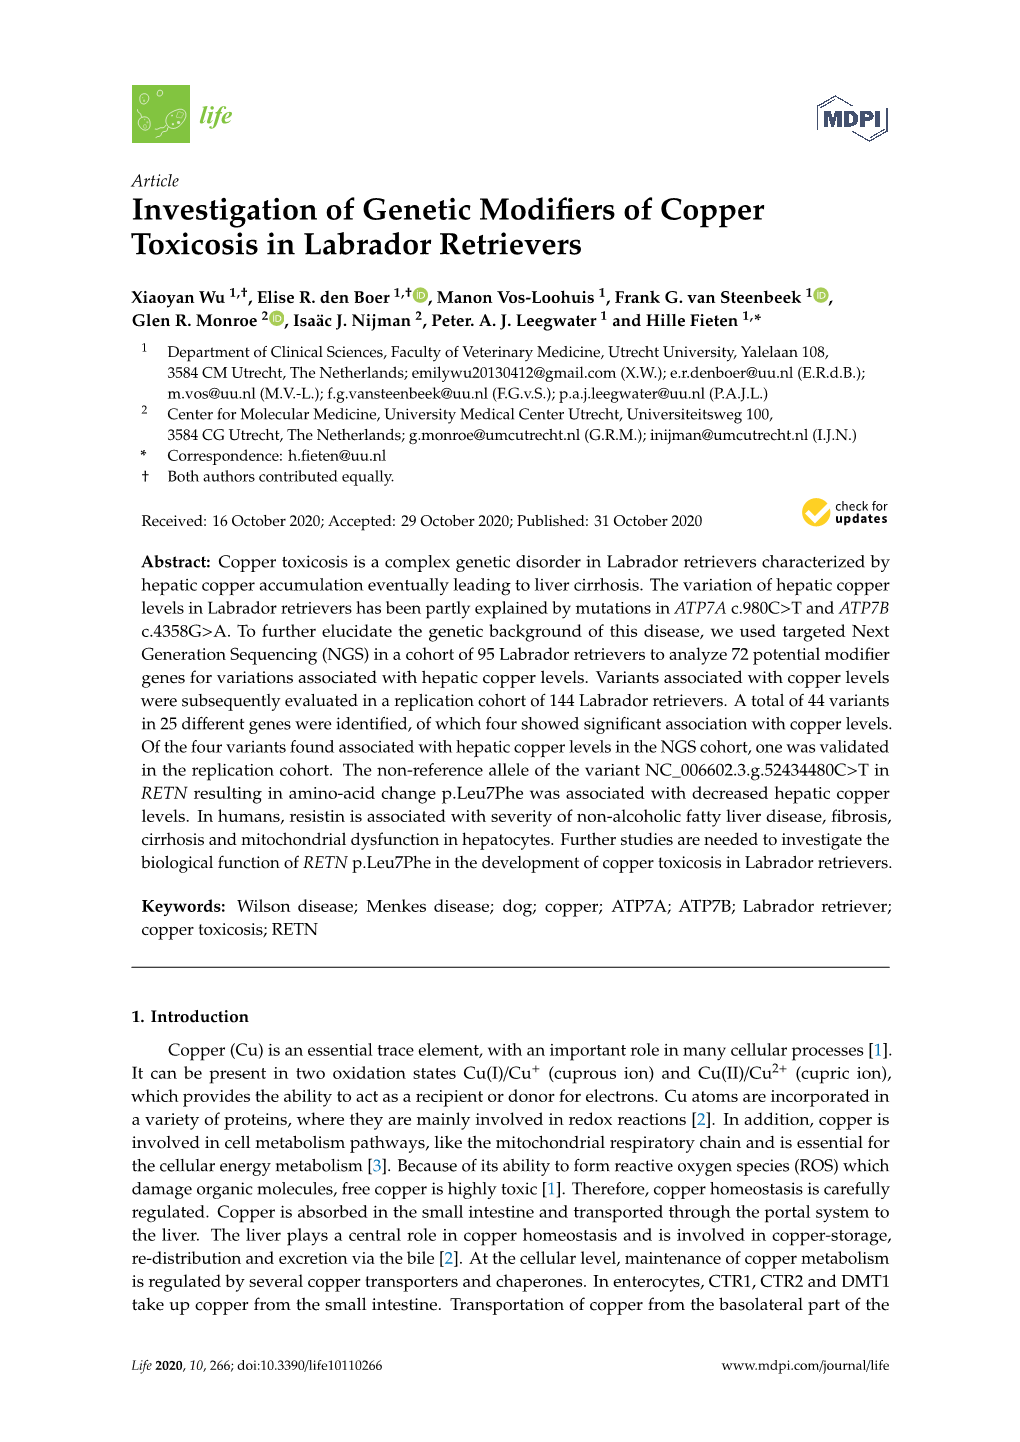 Investigation of Genetic Modifiers of Copper Toxicosis in Labrador